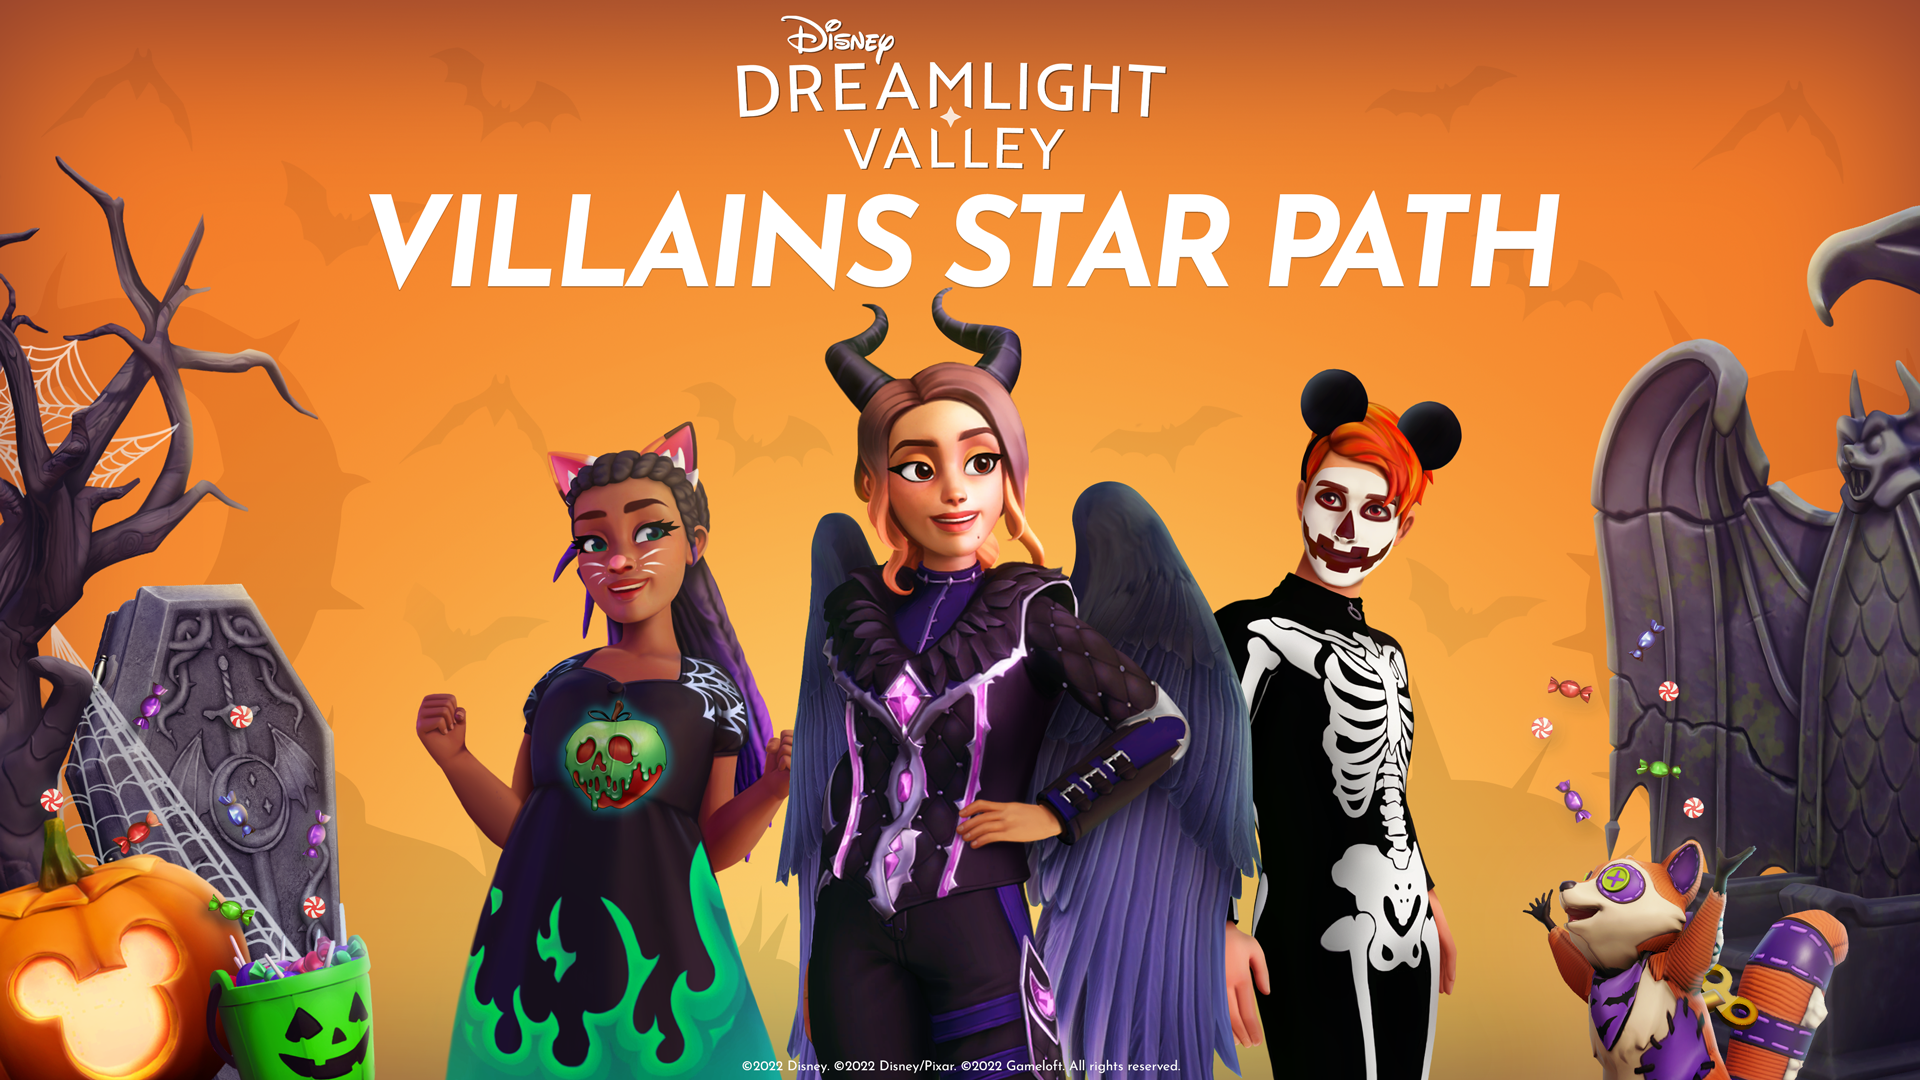 HD wallpaper featuring Disney Dreamlight Valley Villains Star Path with vibrant character artwork for desktop background.